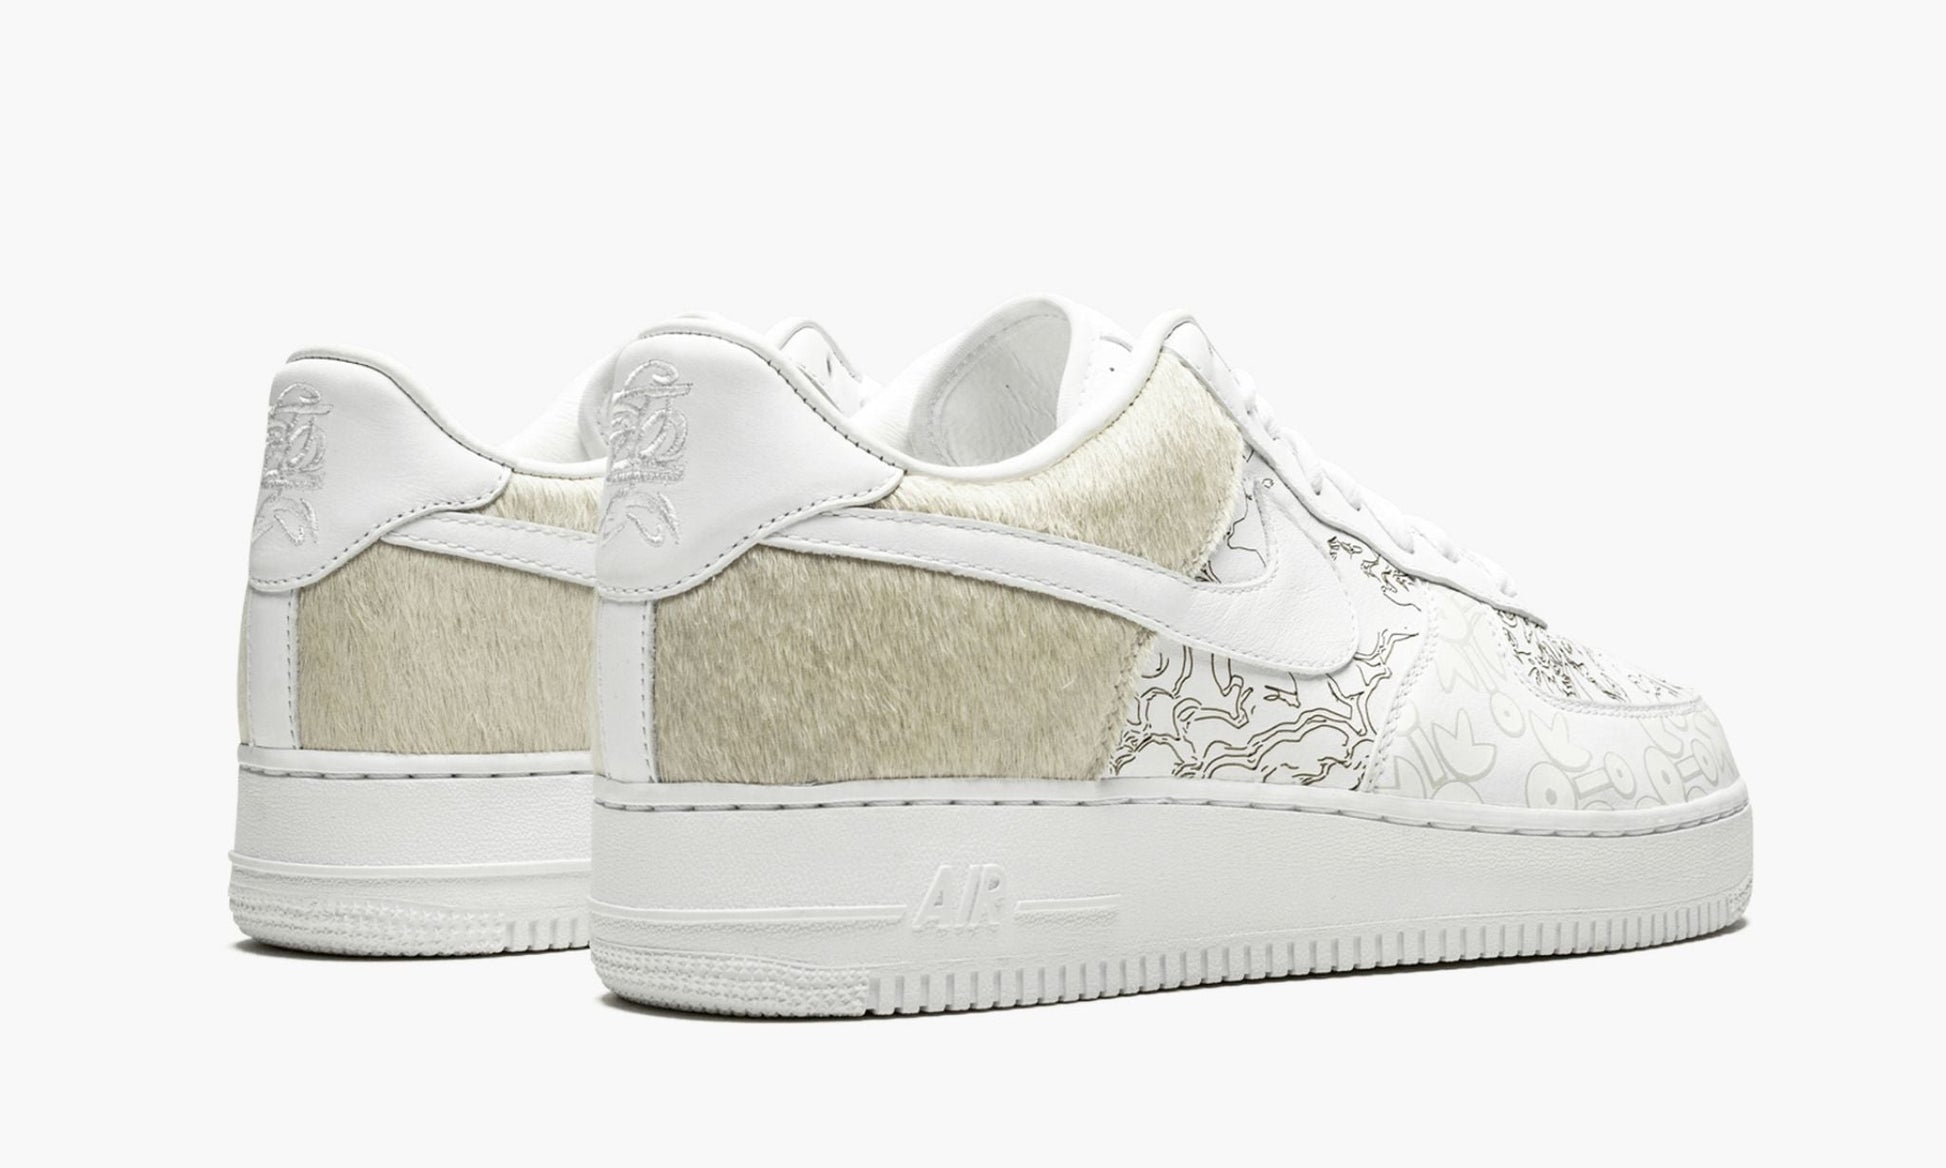 Air Force 1 PRM YOTD '18 "Year of the Dog"